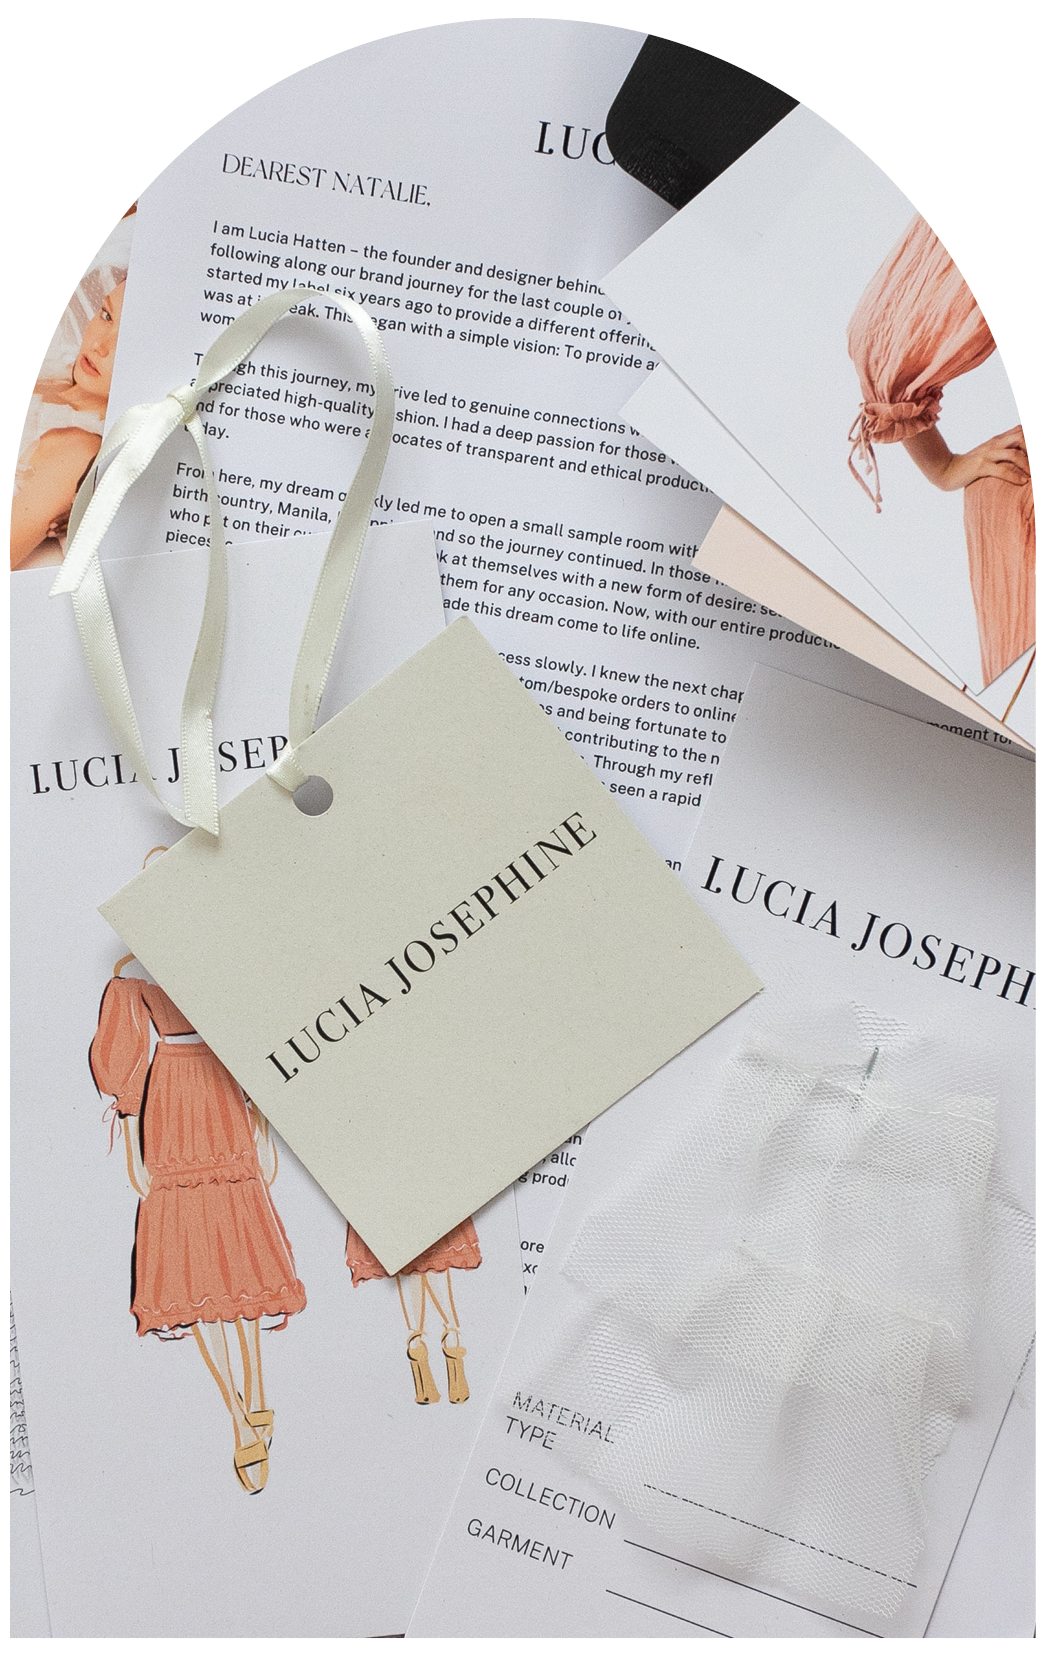 The Launch of Lucia Josephine Online